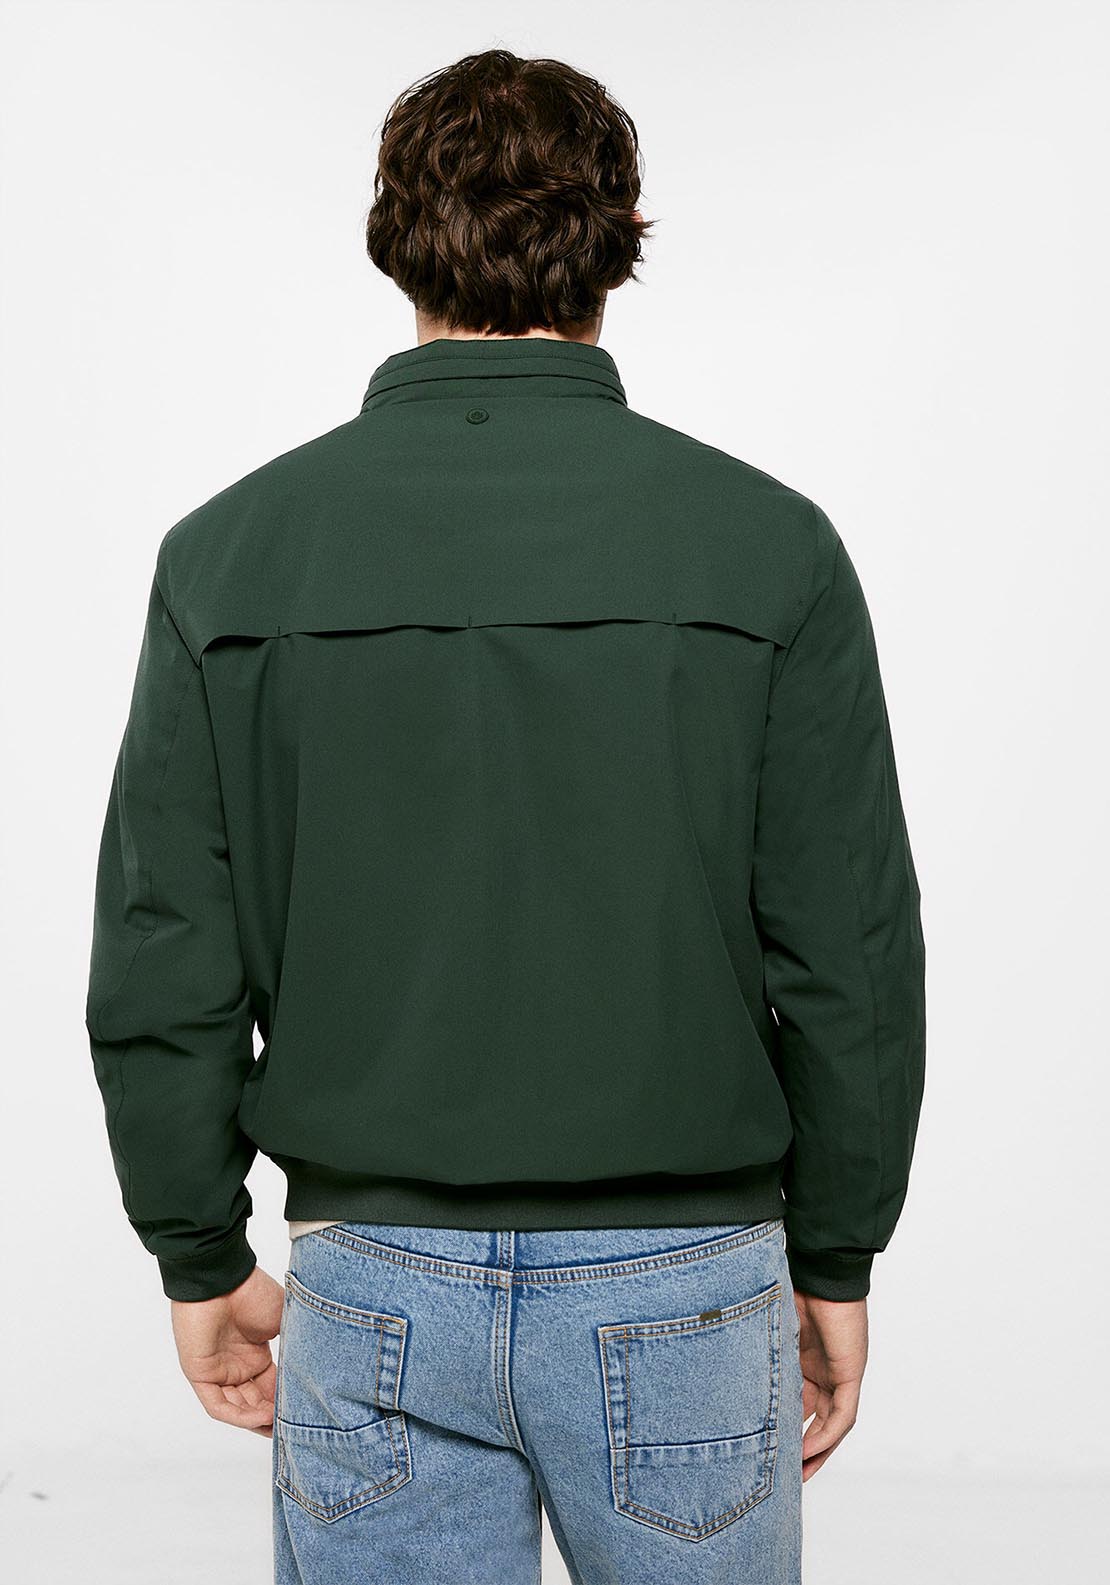 Springfield Technical jacket - Green 2 Shaws Department Stores